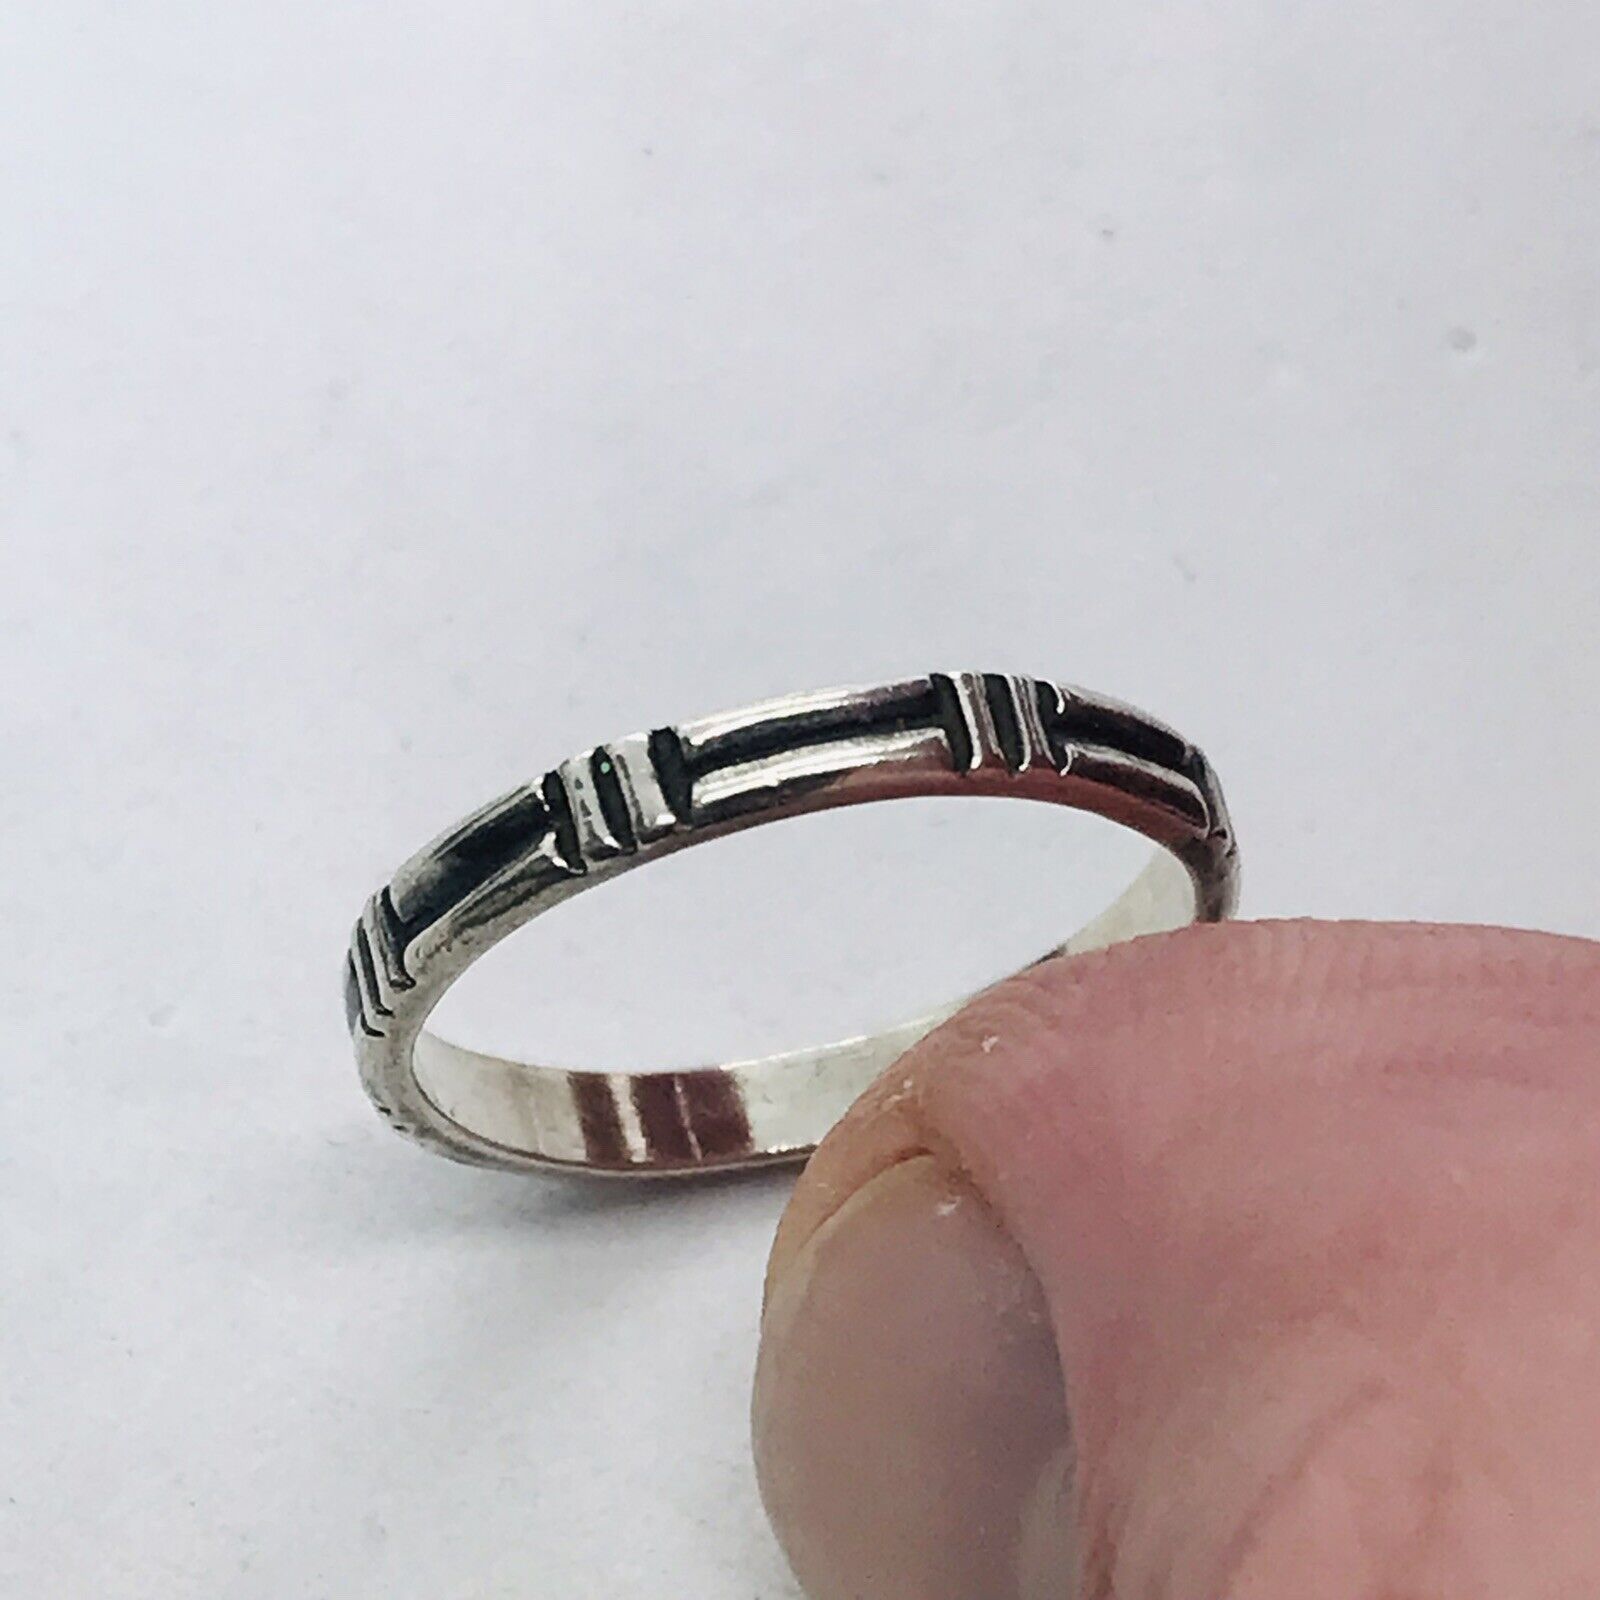 SIZE 7 GEOMETRIC BAND STERLING SILVER RING 1.7g 925 FINE JEWELRY MARKED